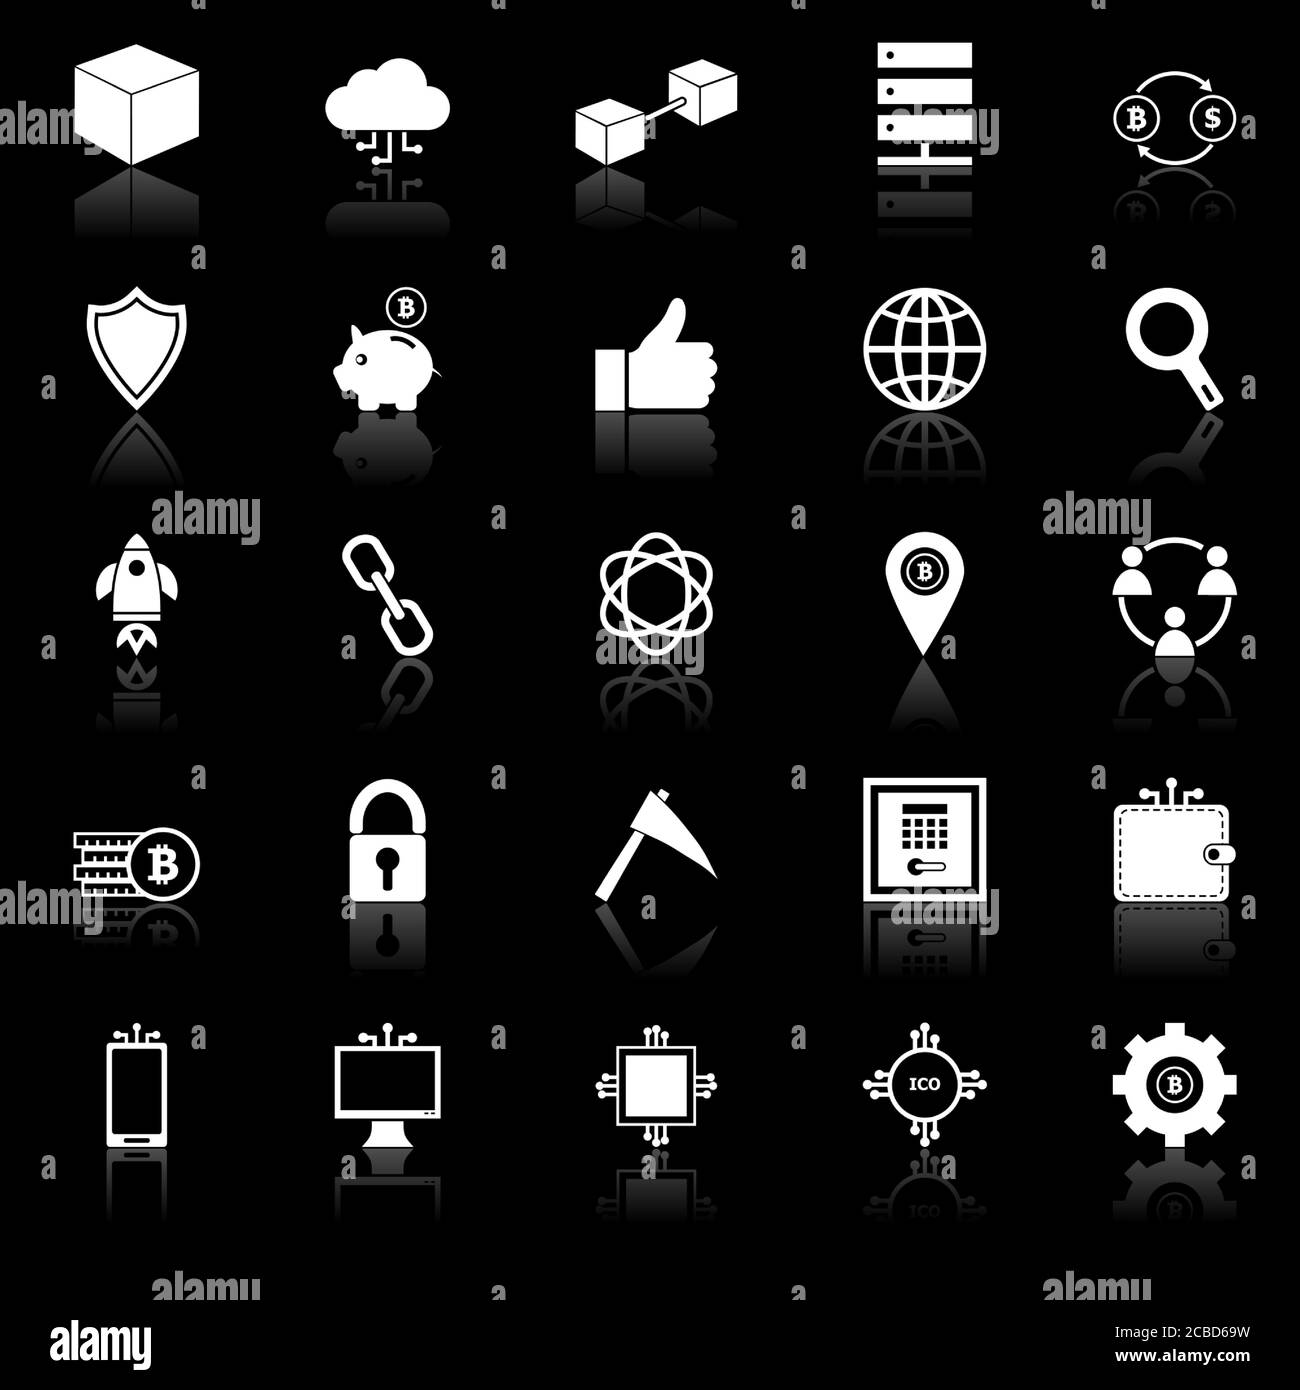 Blockchain icons with reflect on black background, stock vector Stock Vector